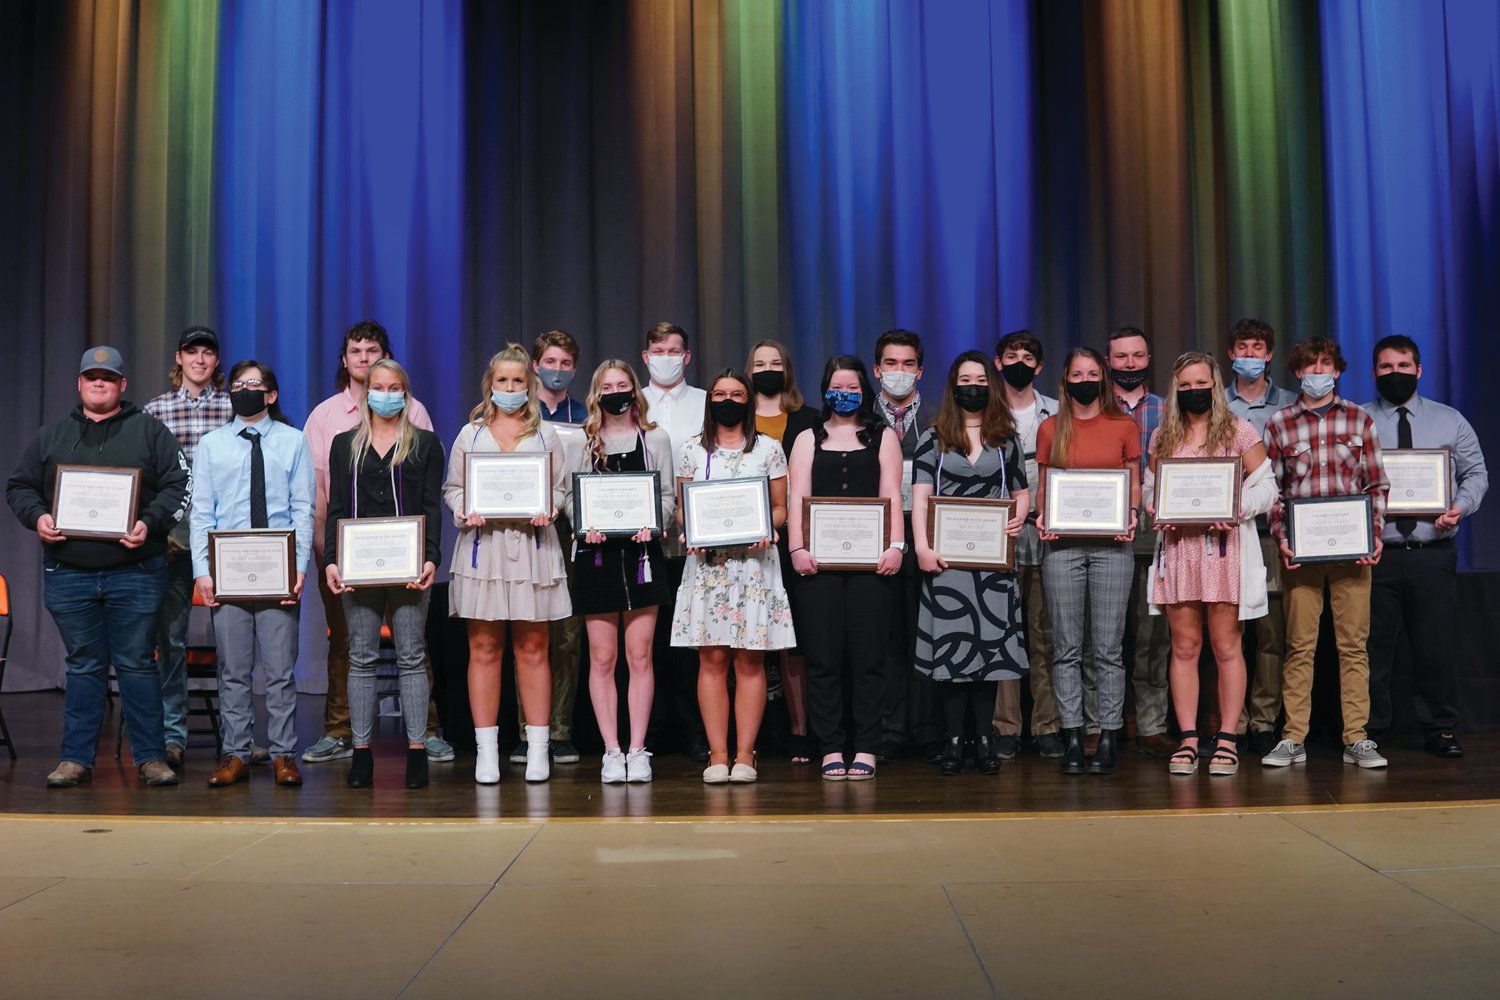 CTE students were honored in three categories, Excellence in CTE, Outstanding Improvement, and Service in CTE by their program instructors for their commitment to gaining skills and preparing them for careers and further education after graduation.